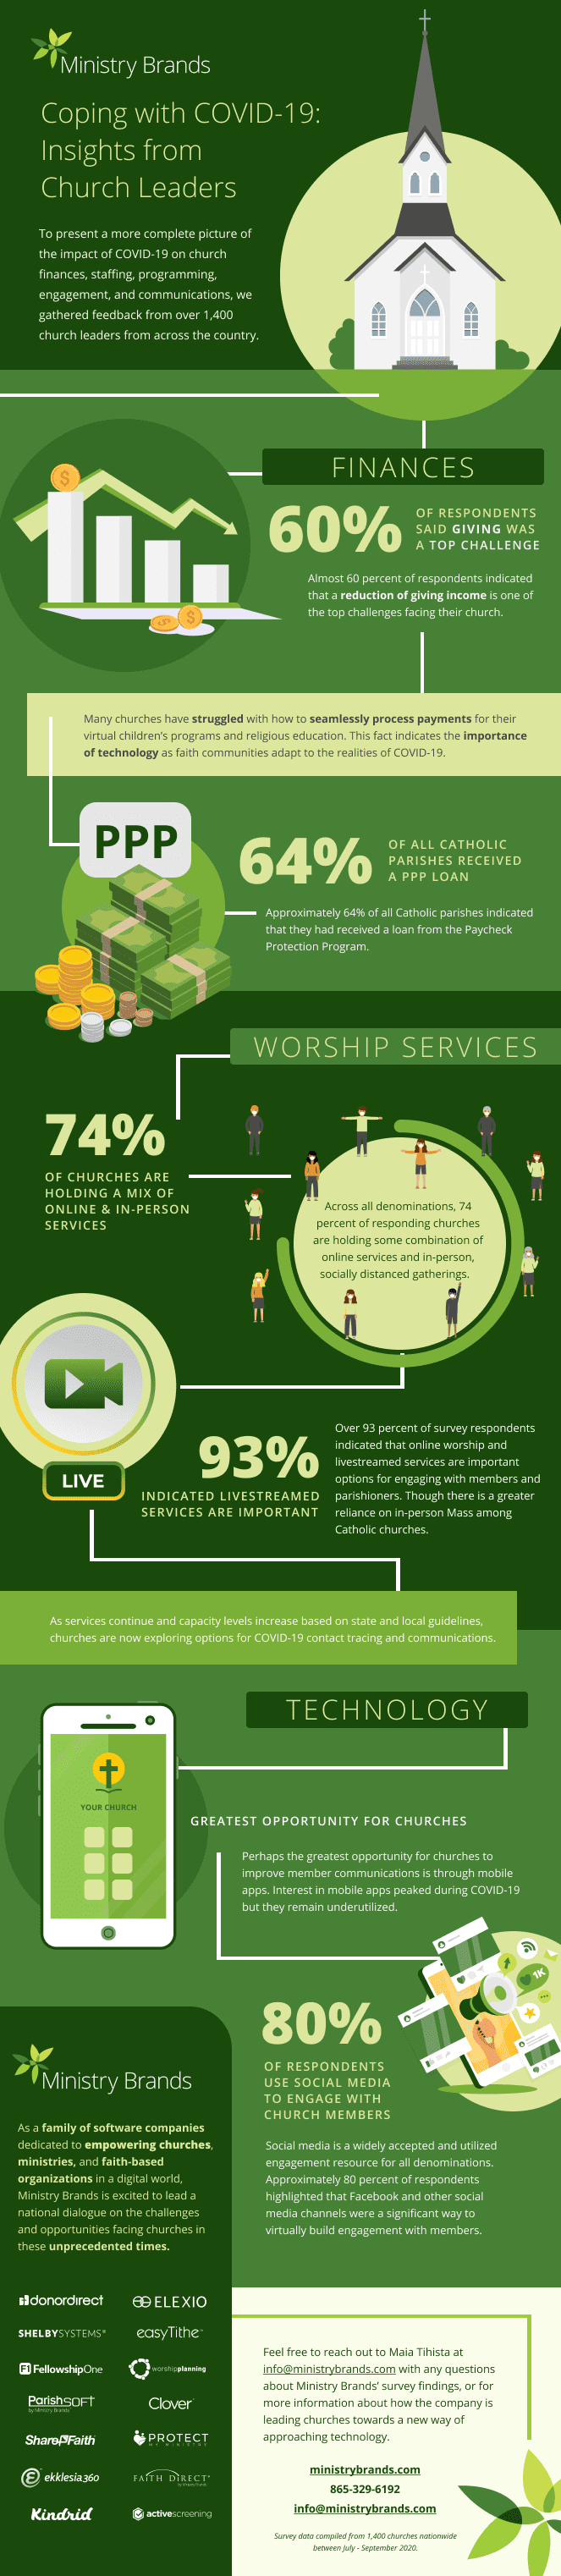 Coping with COVID 19 Insights from Church Leaders Infographic